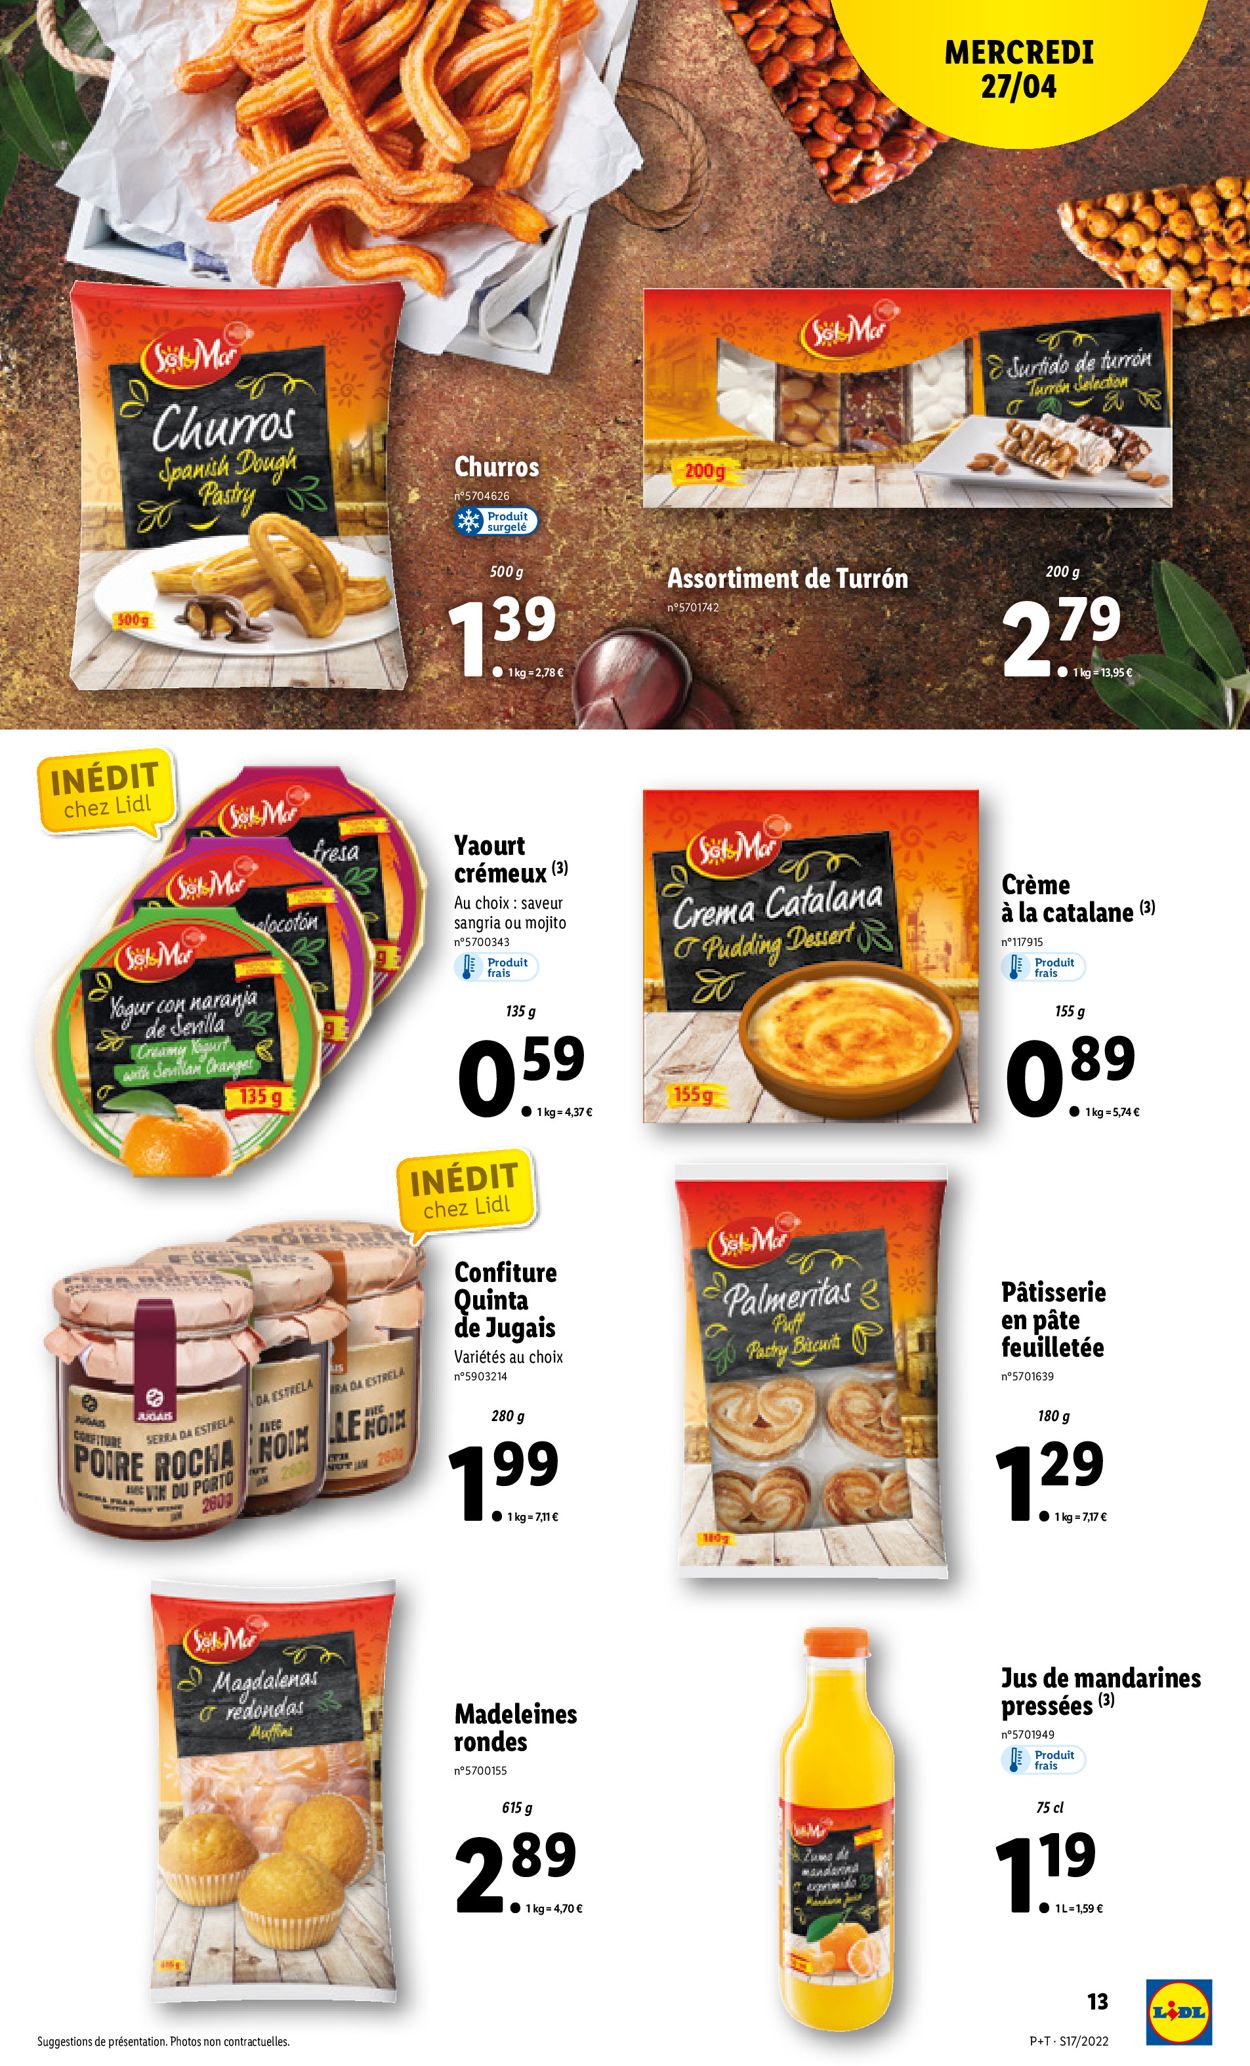 Lidl Catalogue - 27.04-03.05.2022 (Page 13)